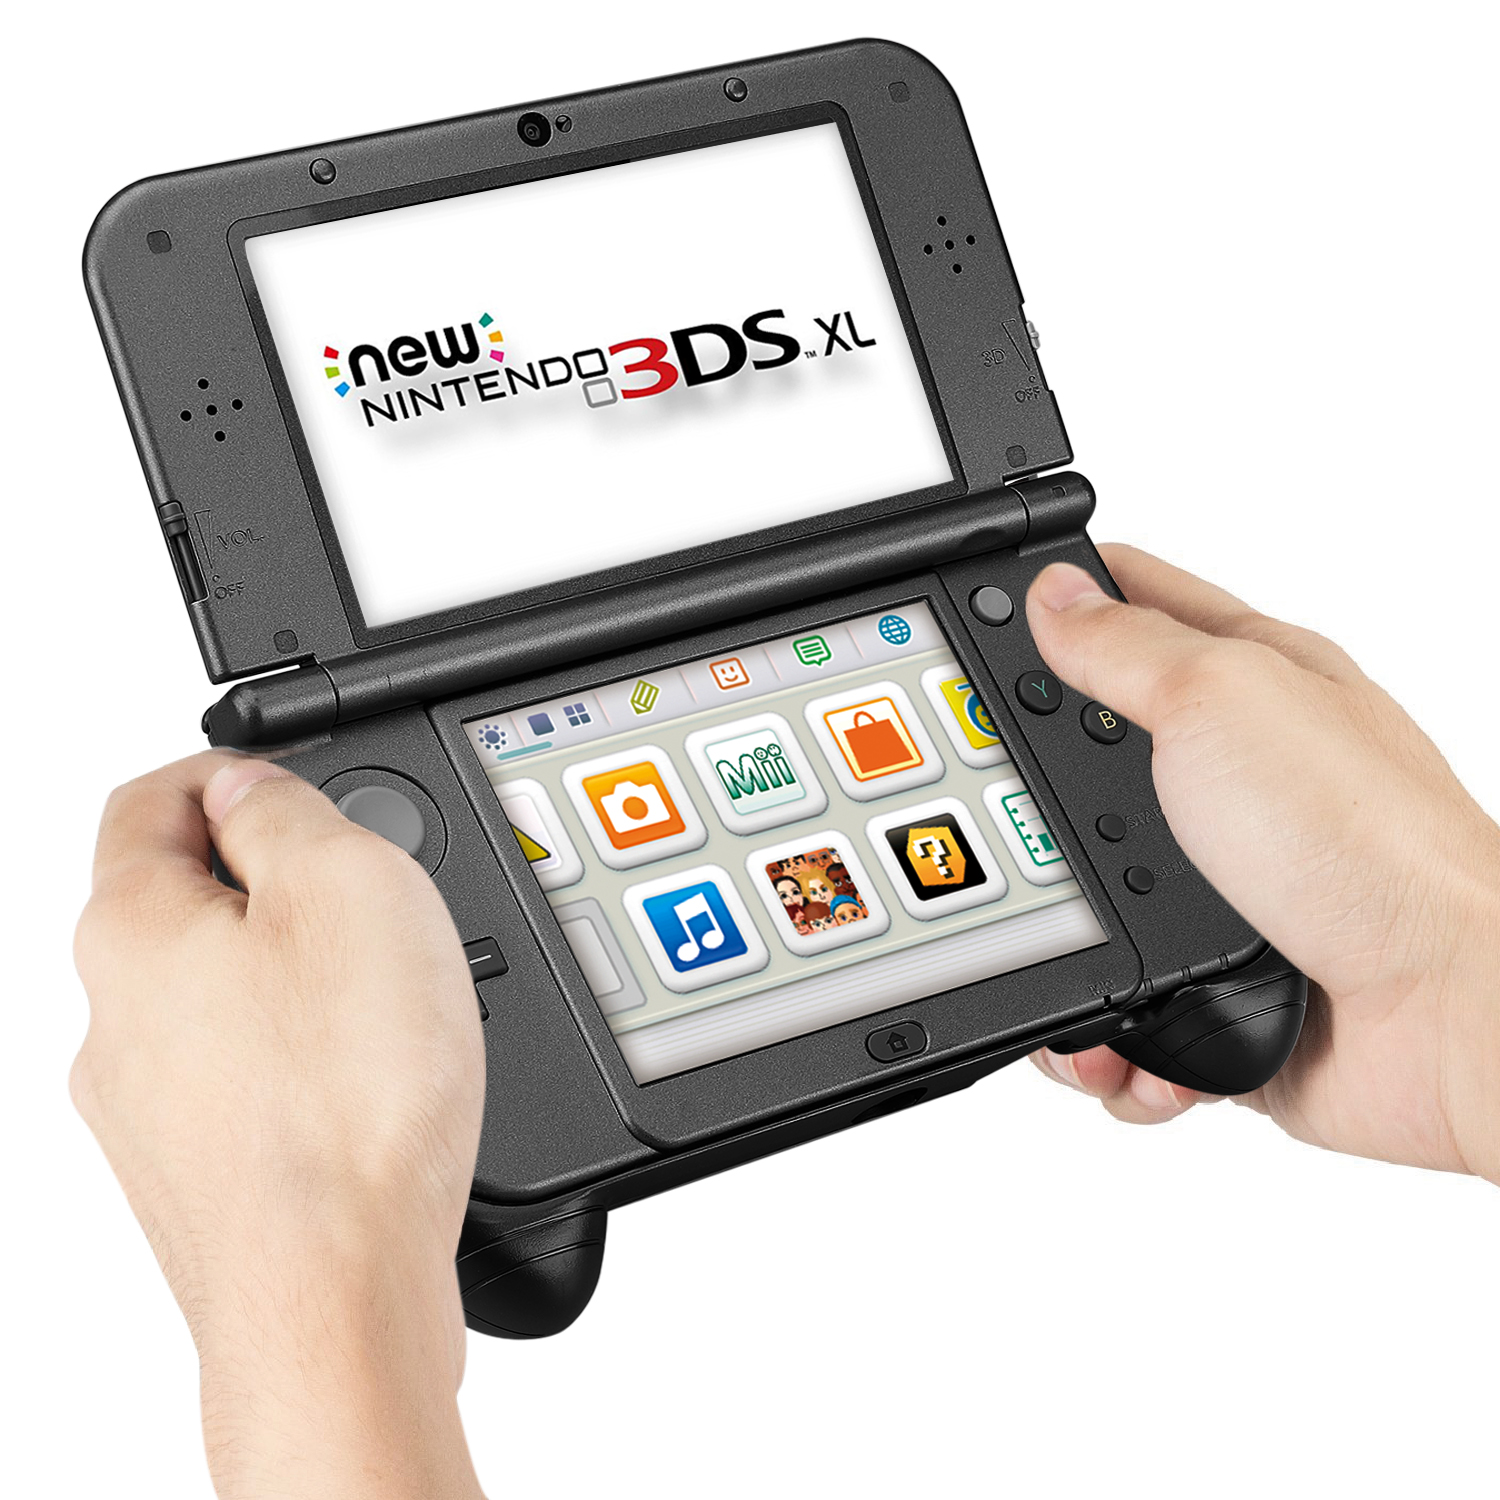 what's the new nintendo ds